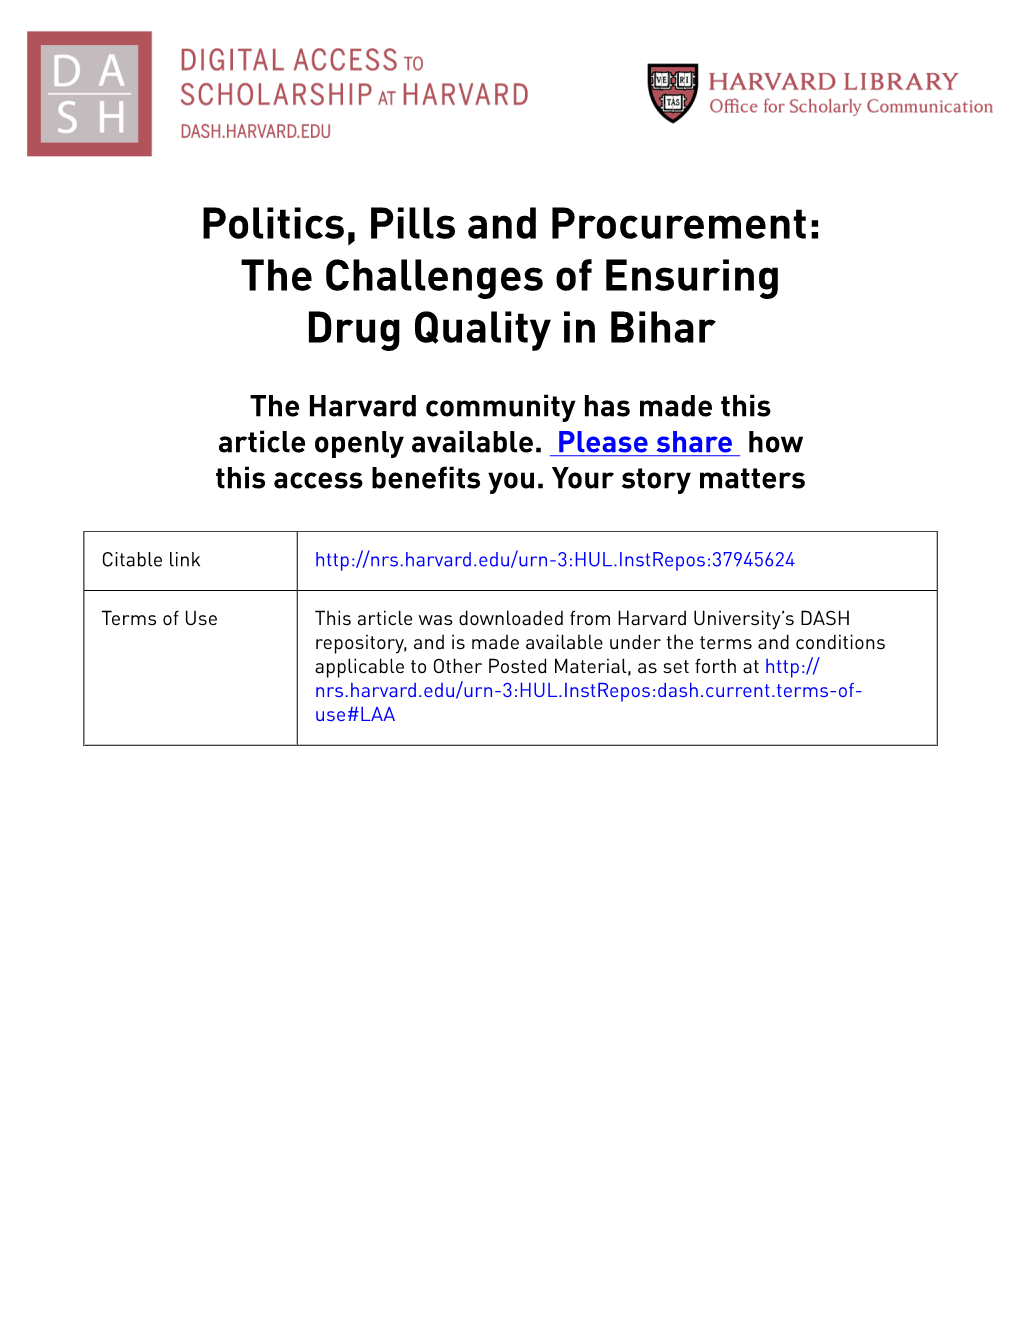 Politics, Pills and Procurement: the Challenges of Ensuring Drug Quality in Bihar